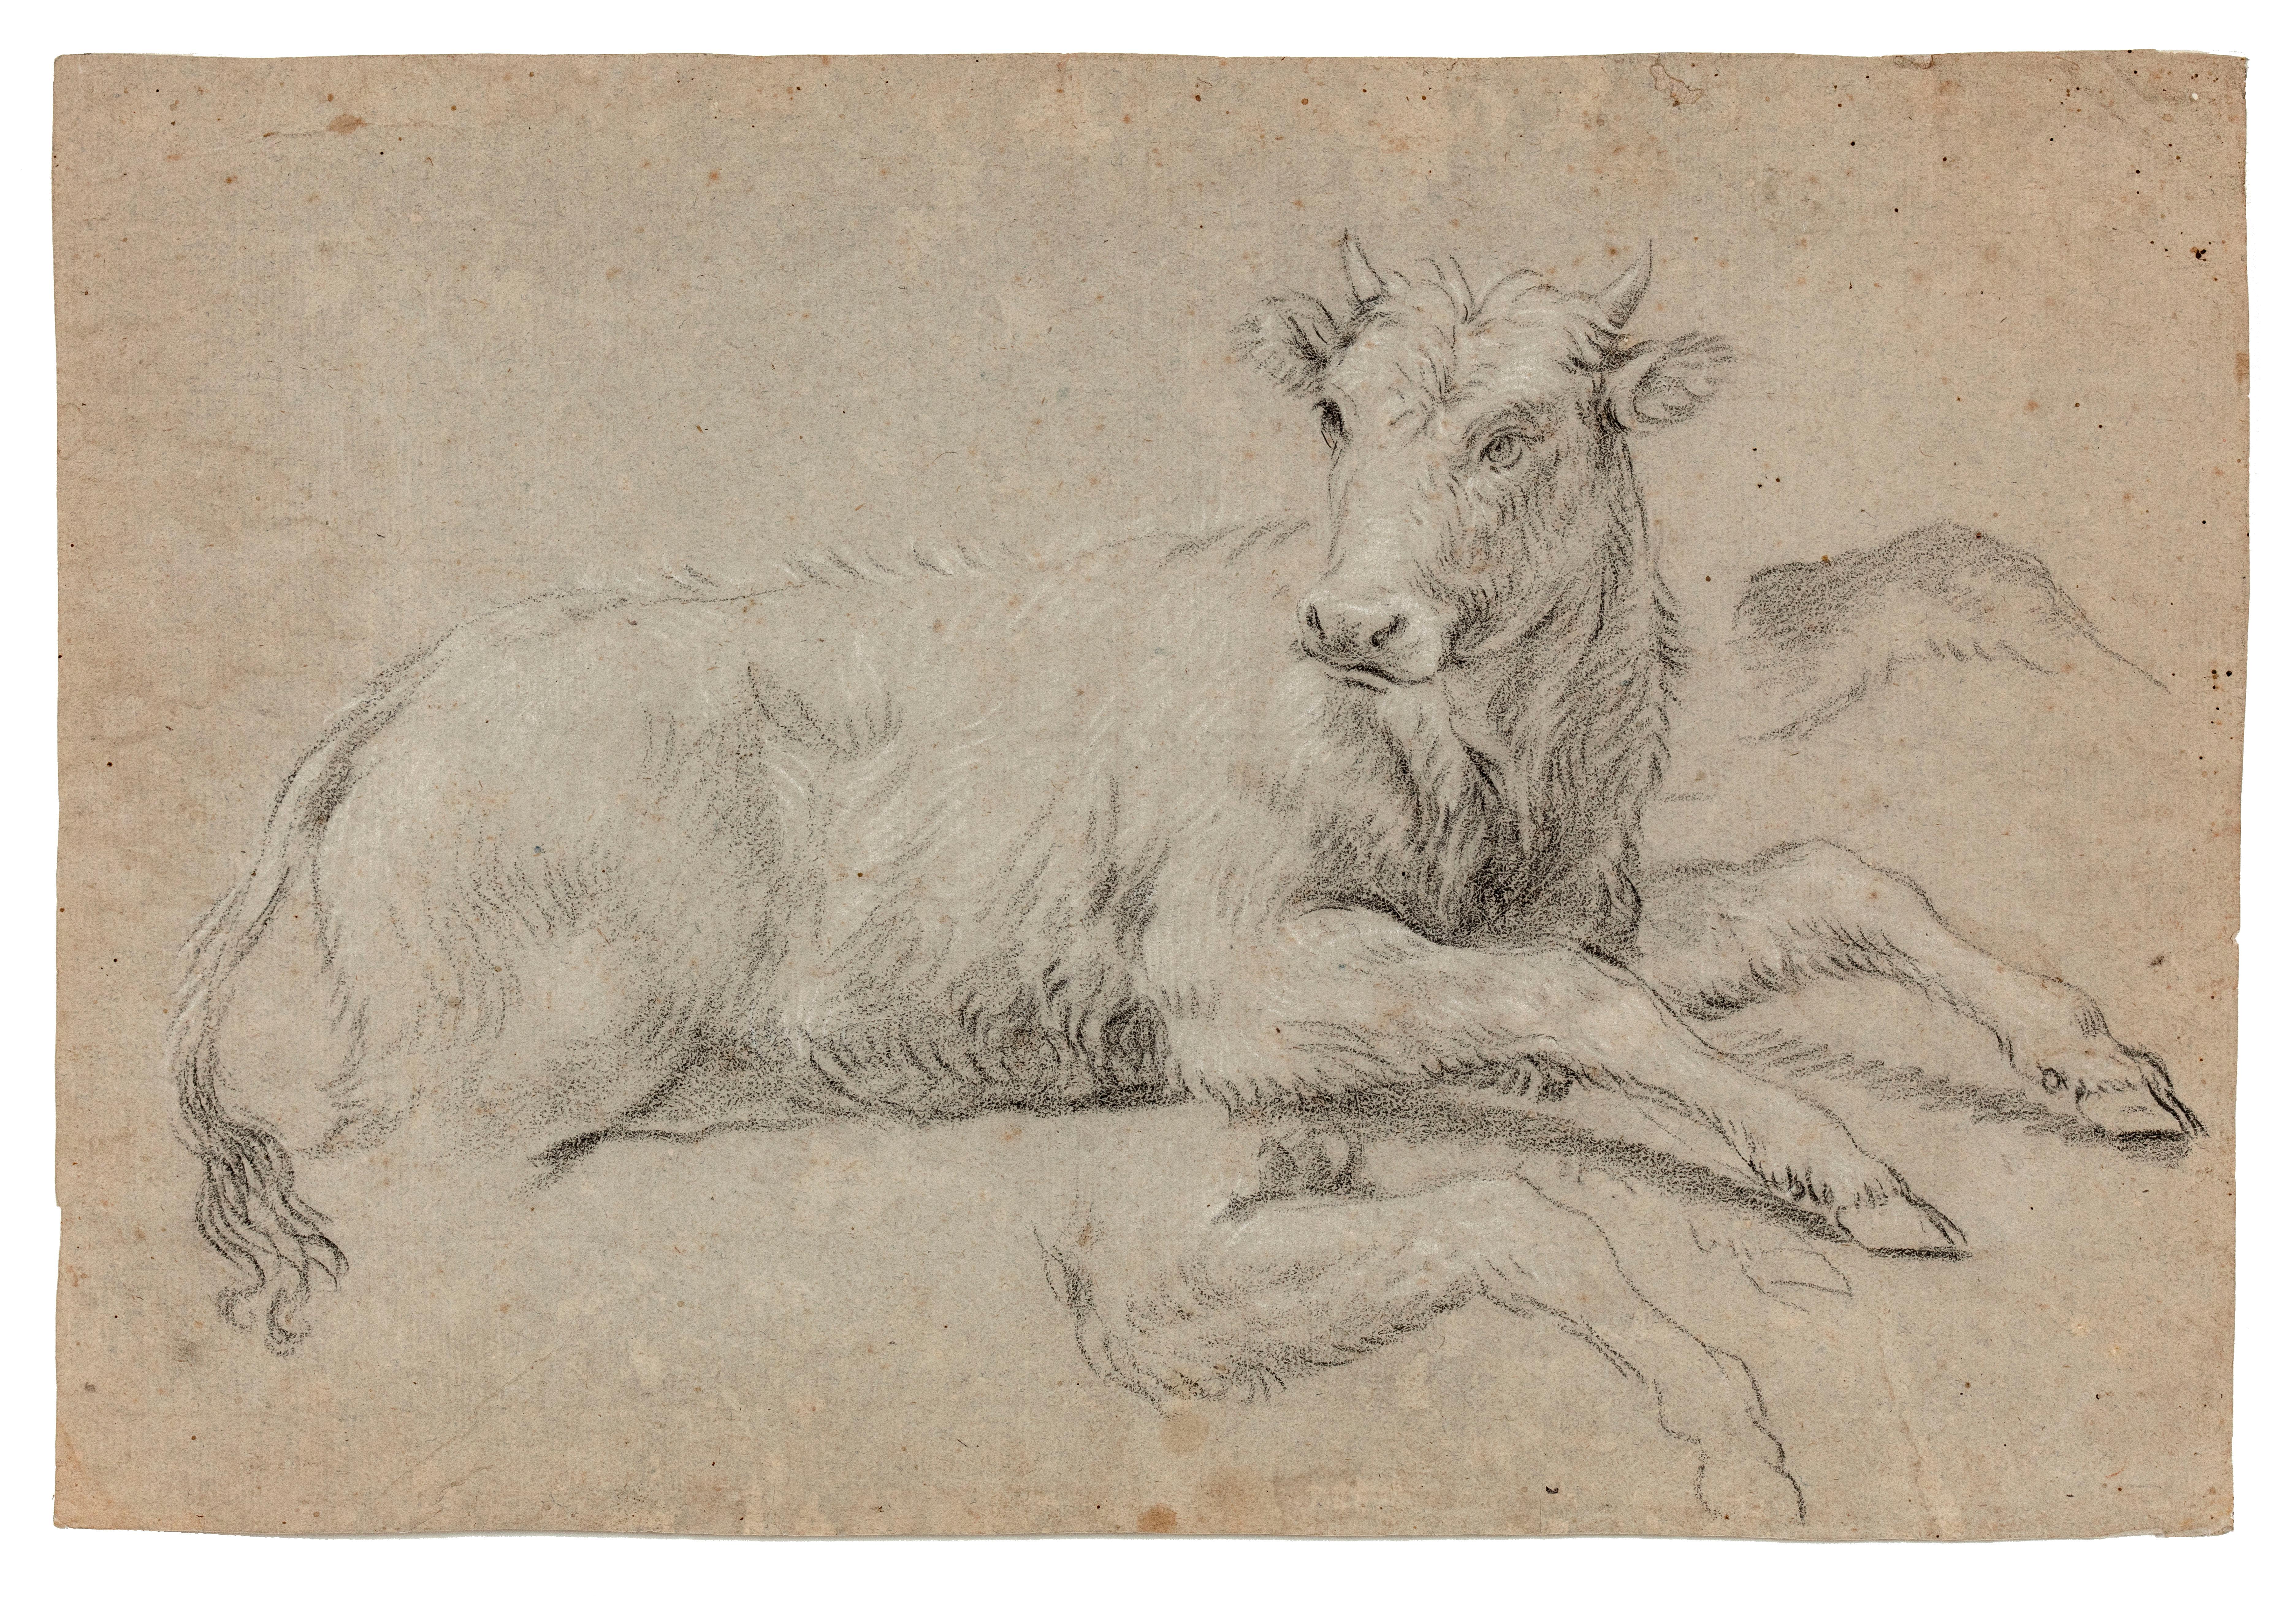 17th Century French School Animal Art - Study of a Bull and Study of Two Heads with Laurel Crowns (recto and verso)